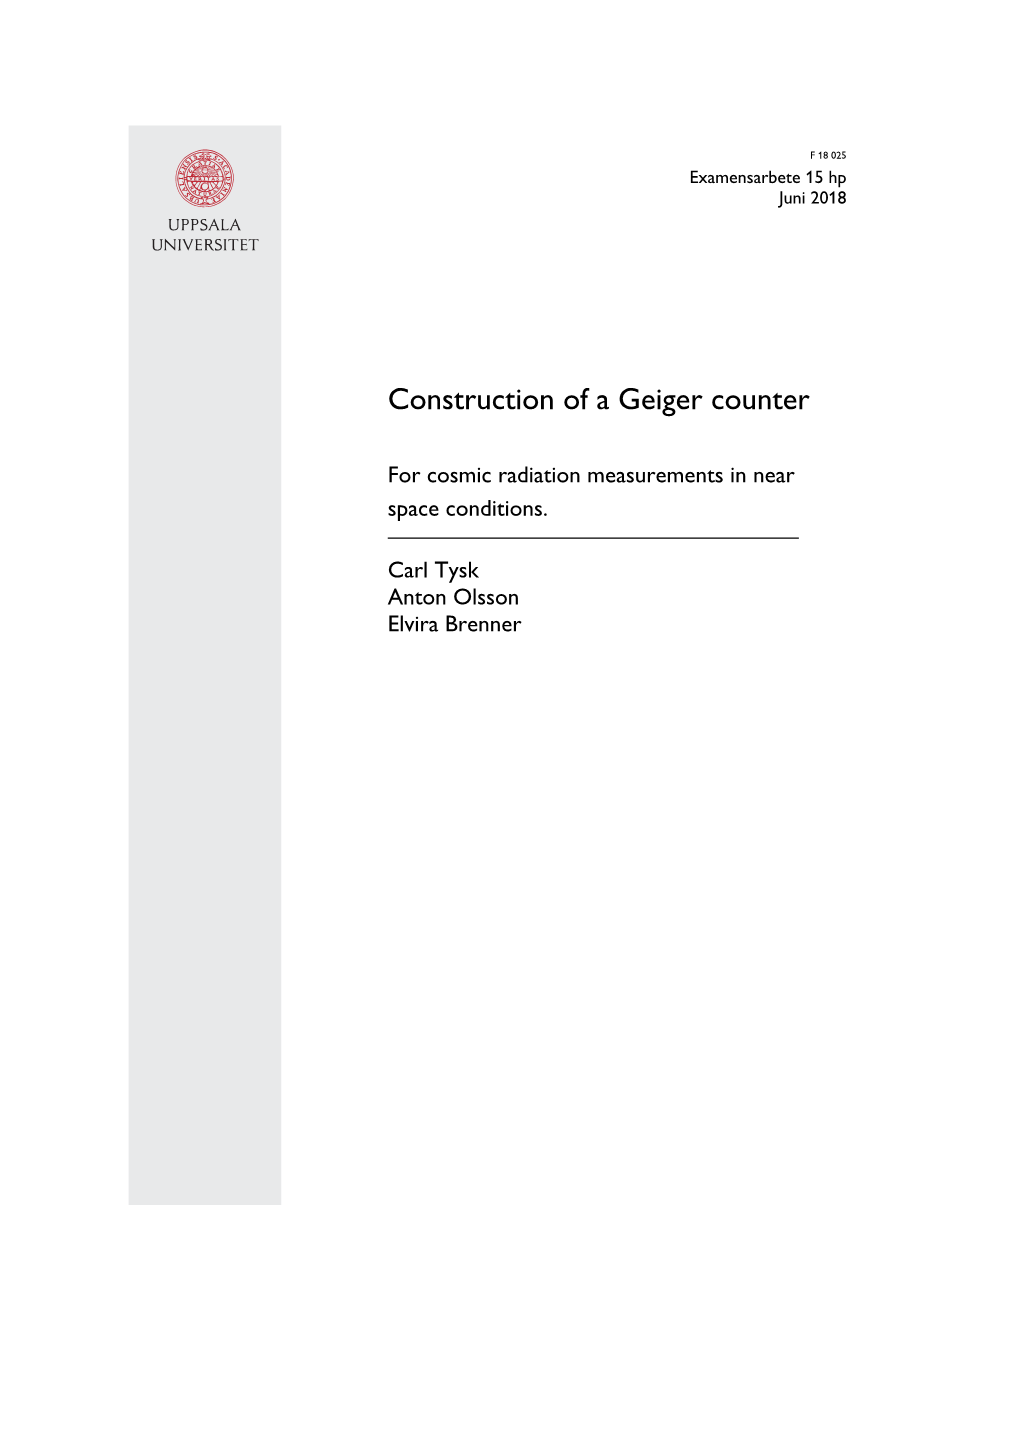 Construction of a Geiger Counter